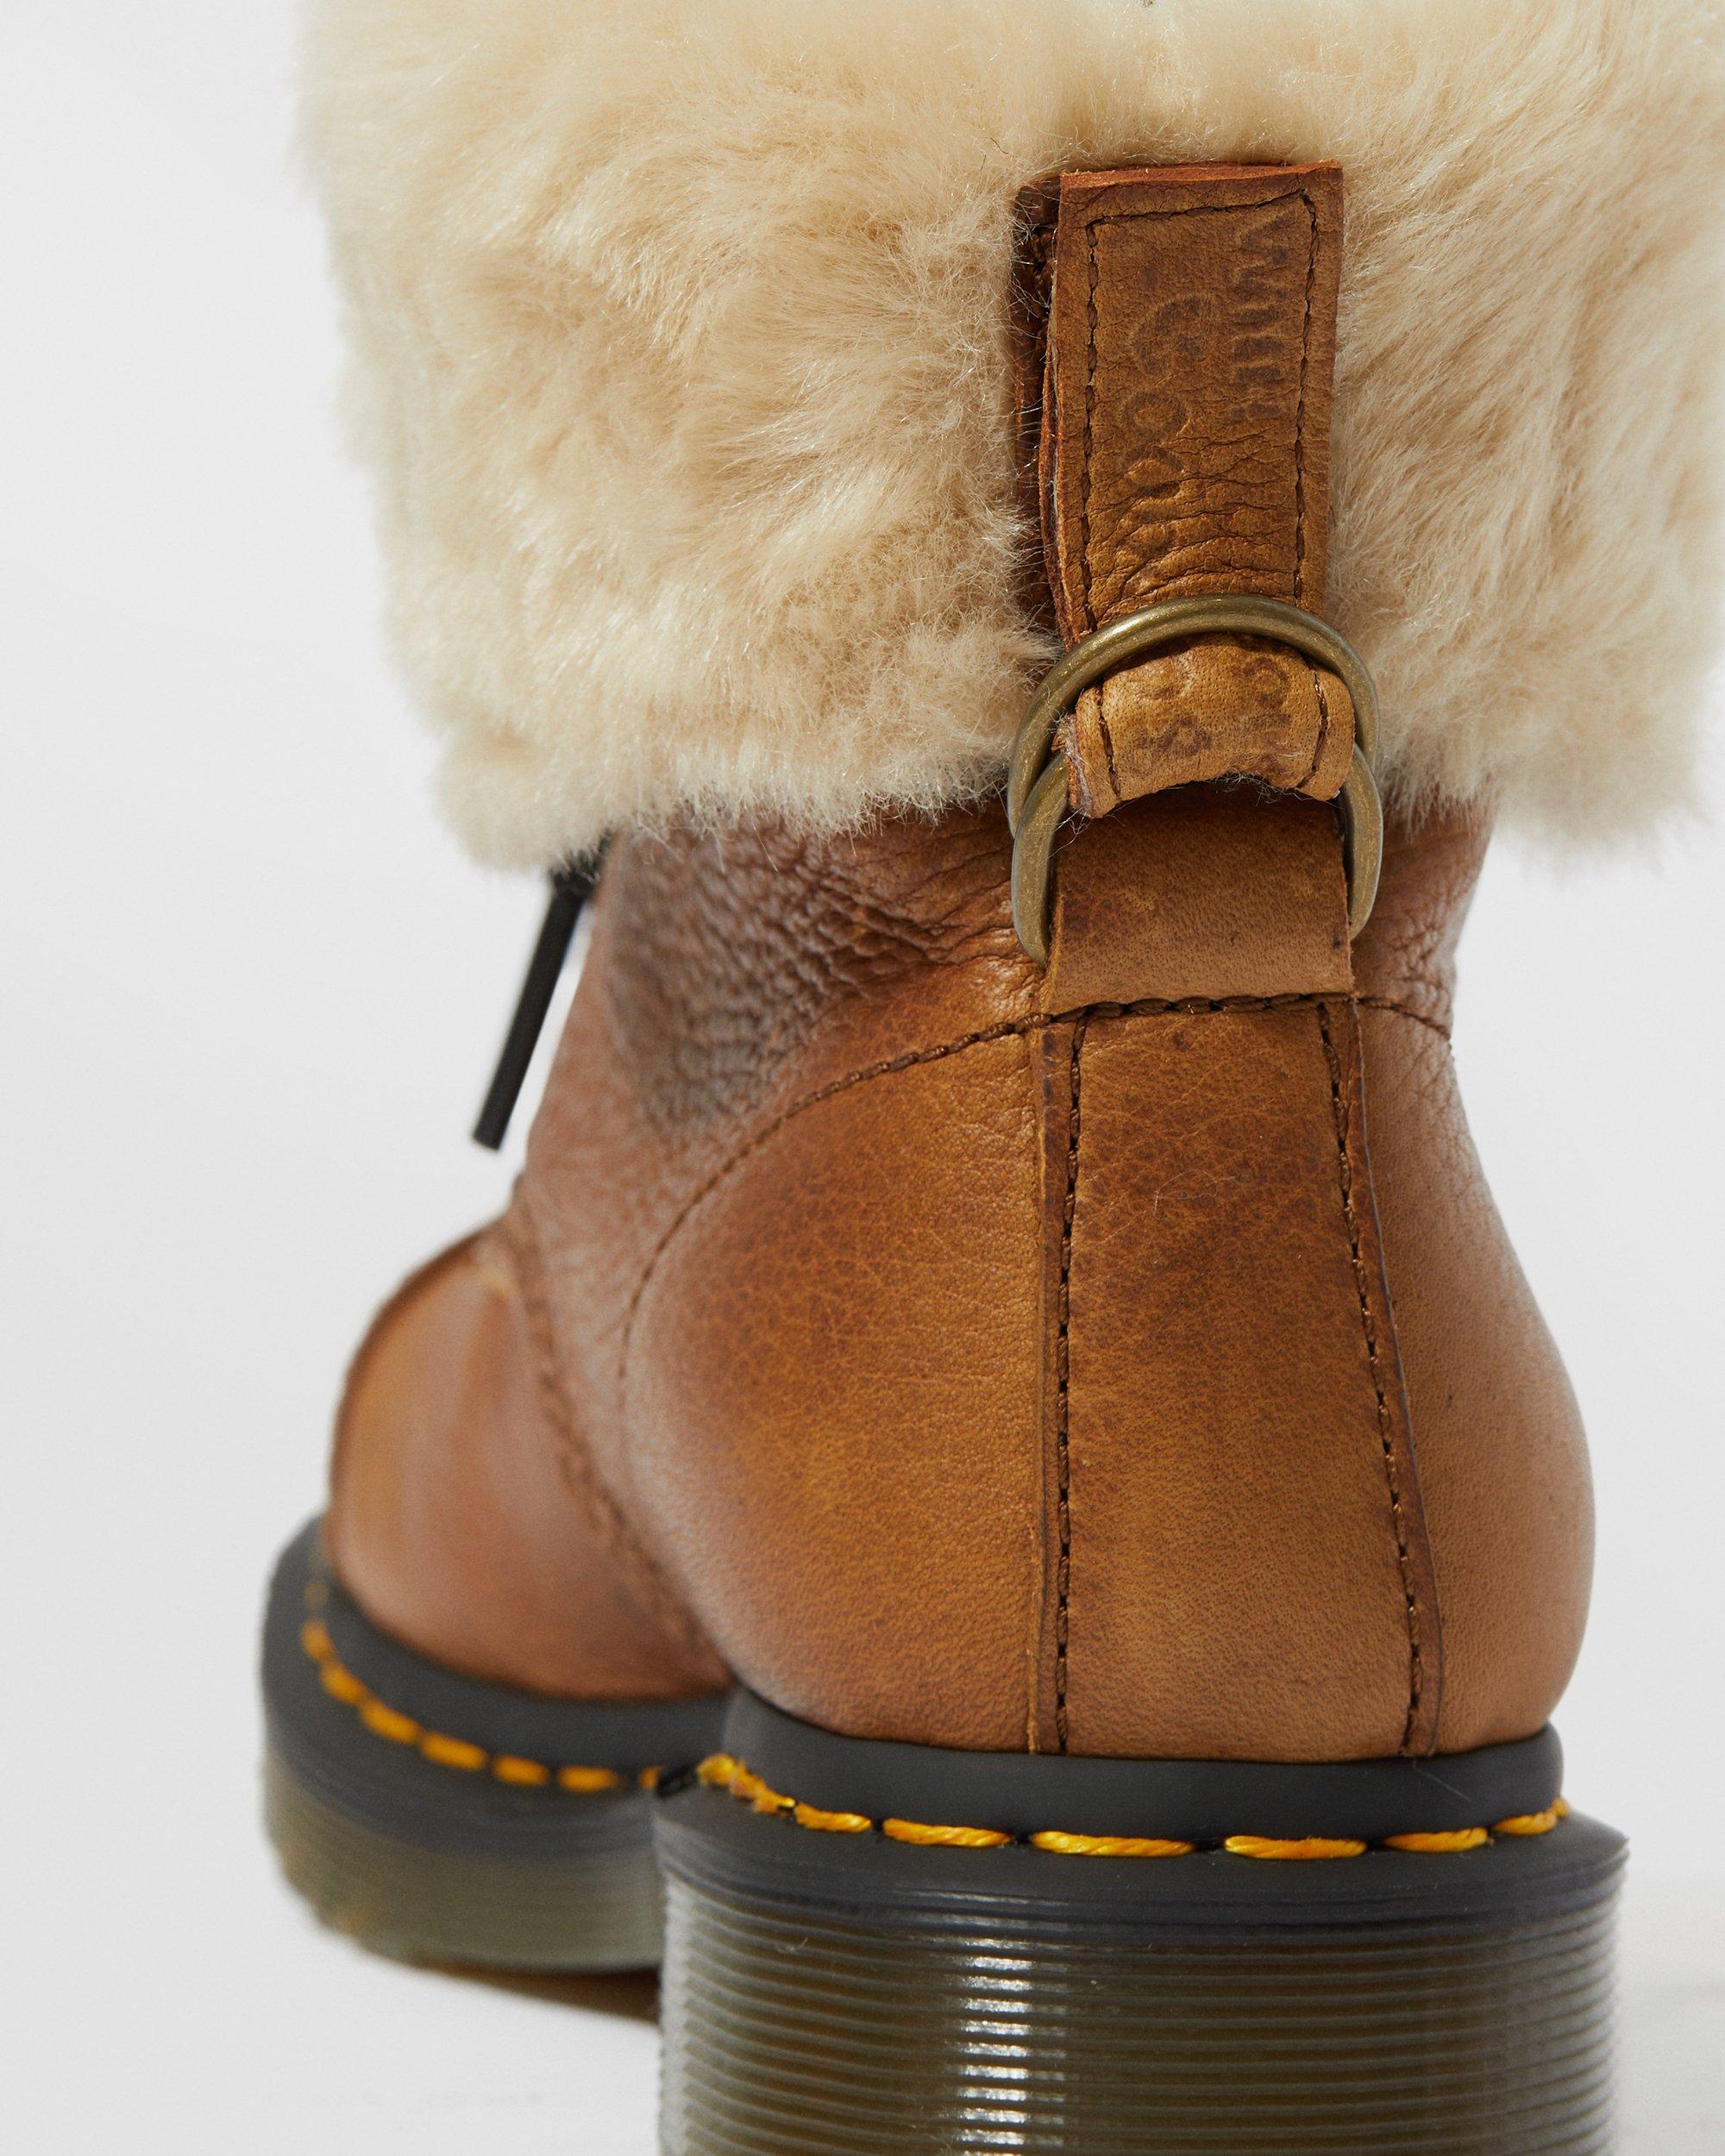 Fur-Lined Aimilita Grizzly Dr. Martens